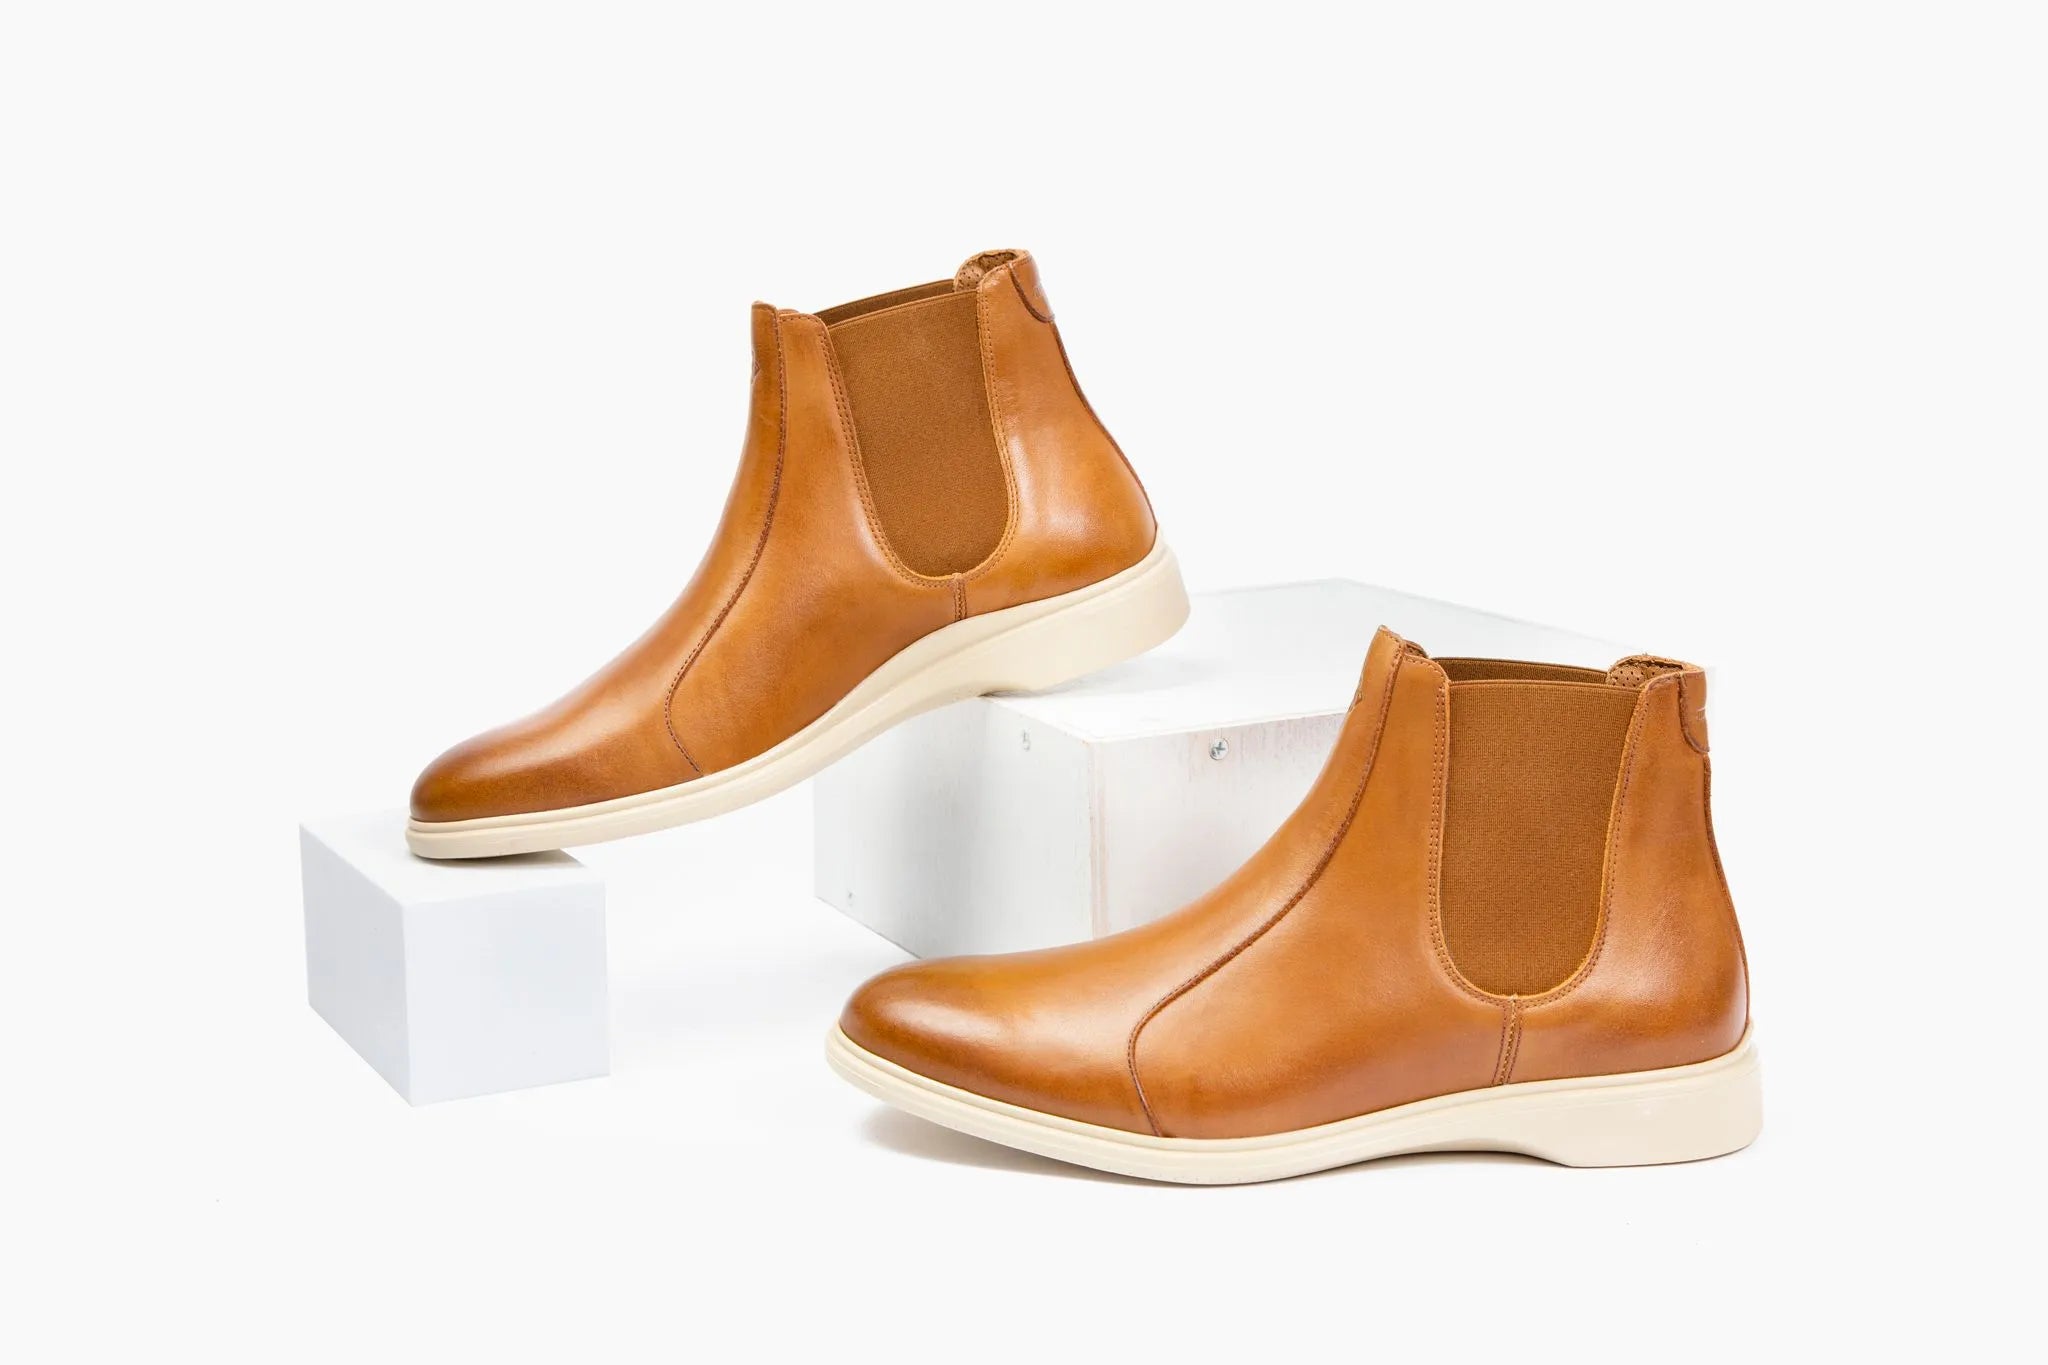 Image of Chelsea boots tilted against white wooden blocks